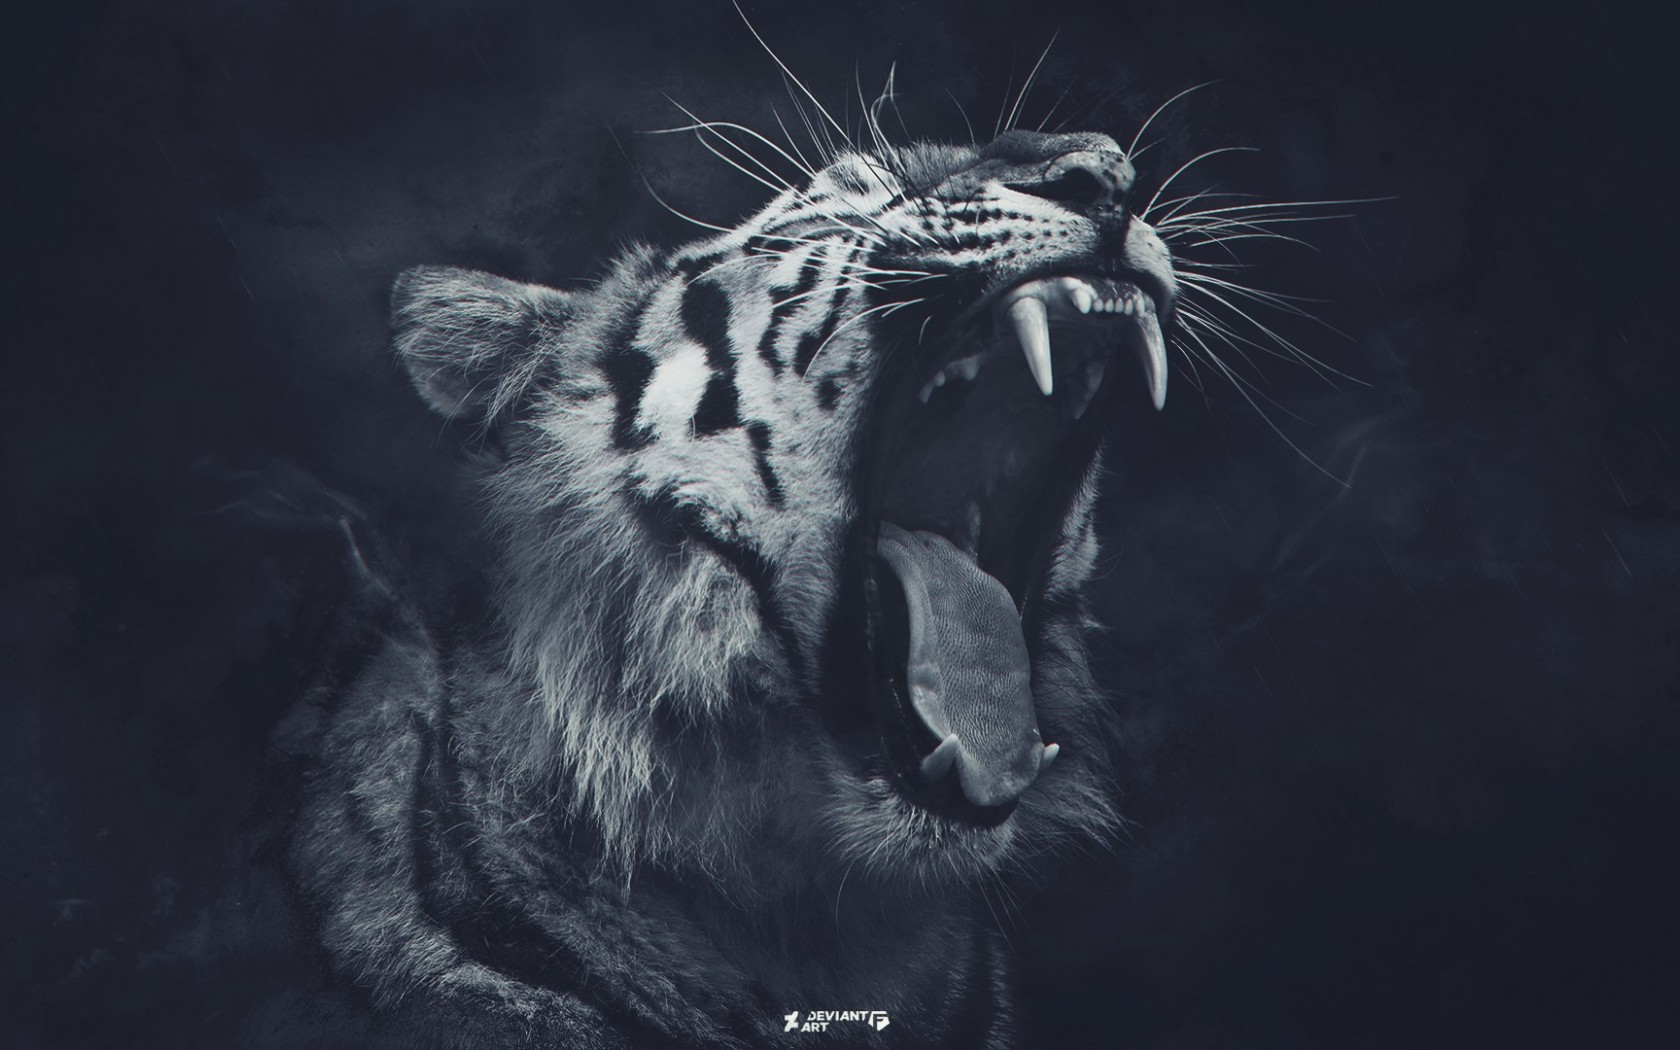 tiger roar black and white photo rendering hd wallpaper 1680x1050